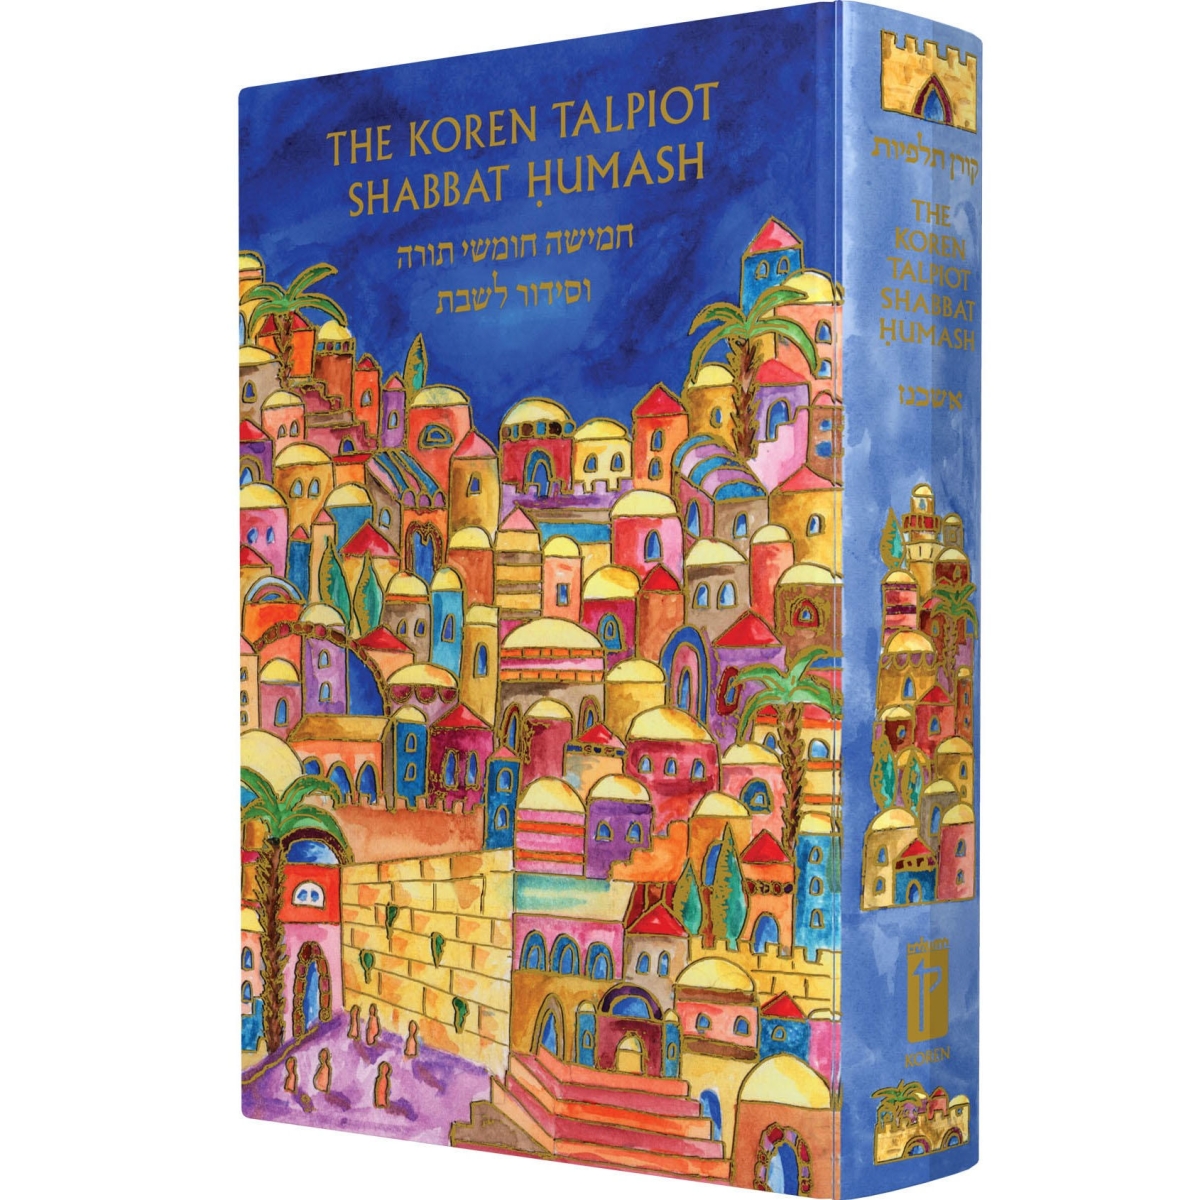 The Koren Talpiot Shabbat Chumash with Cover by Emanuel (Hebrew with English Instructions) - 1